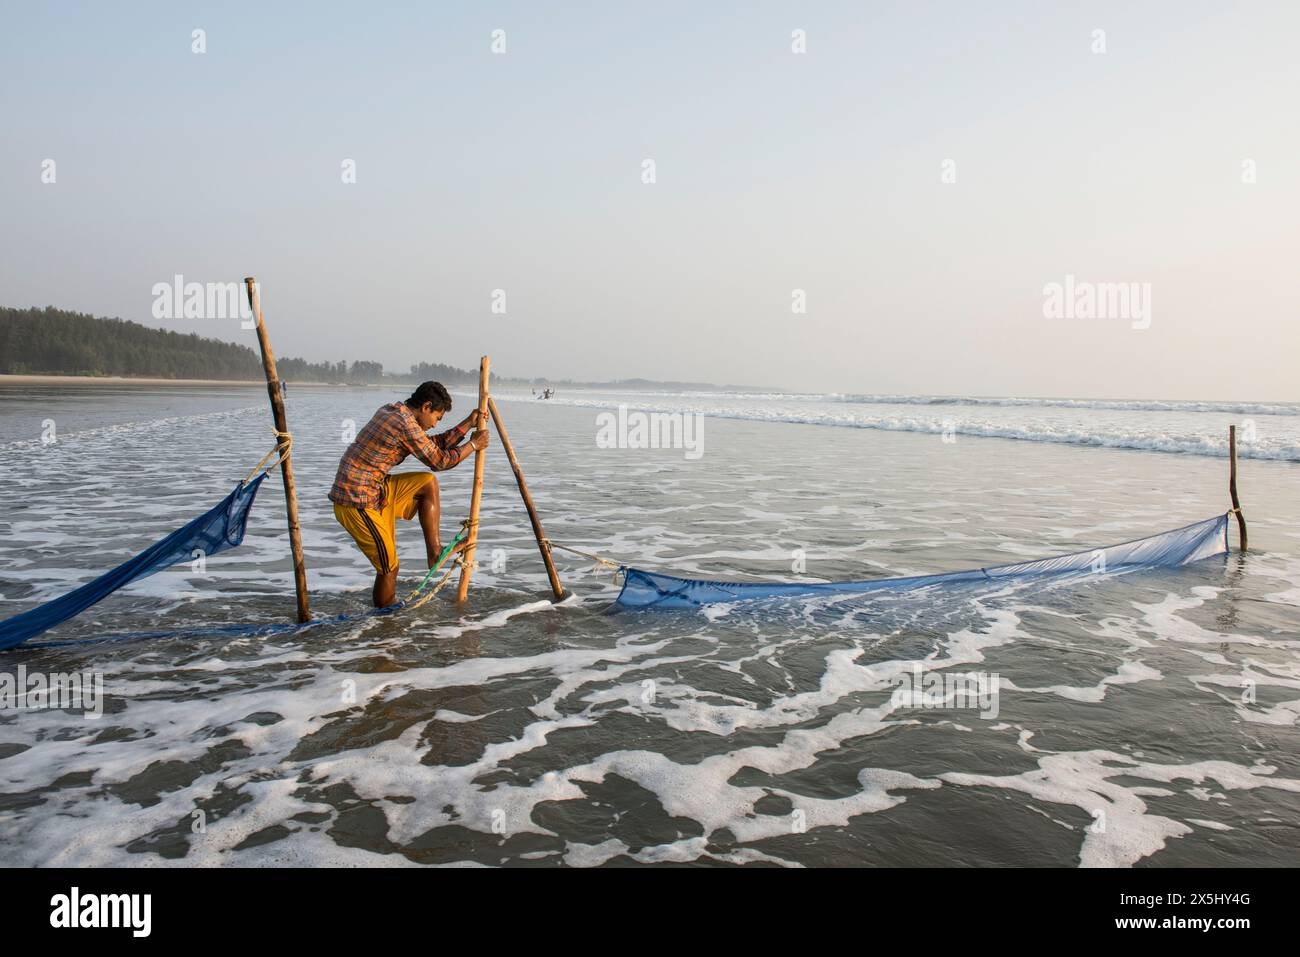 Bangladesh, Cox's Bazar. A fishermen spreads nets in the longest unbroken sea beach in the world. (Editorial use only) Stock Photo